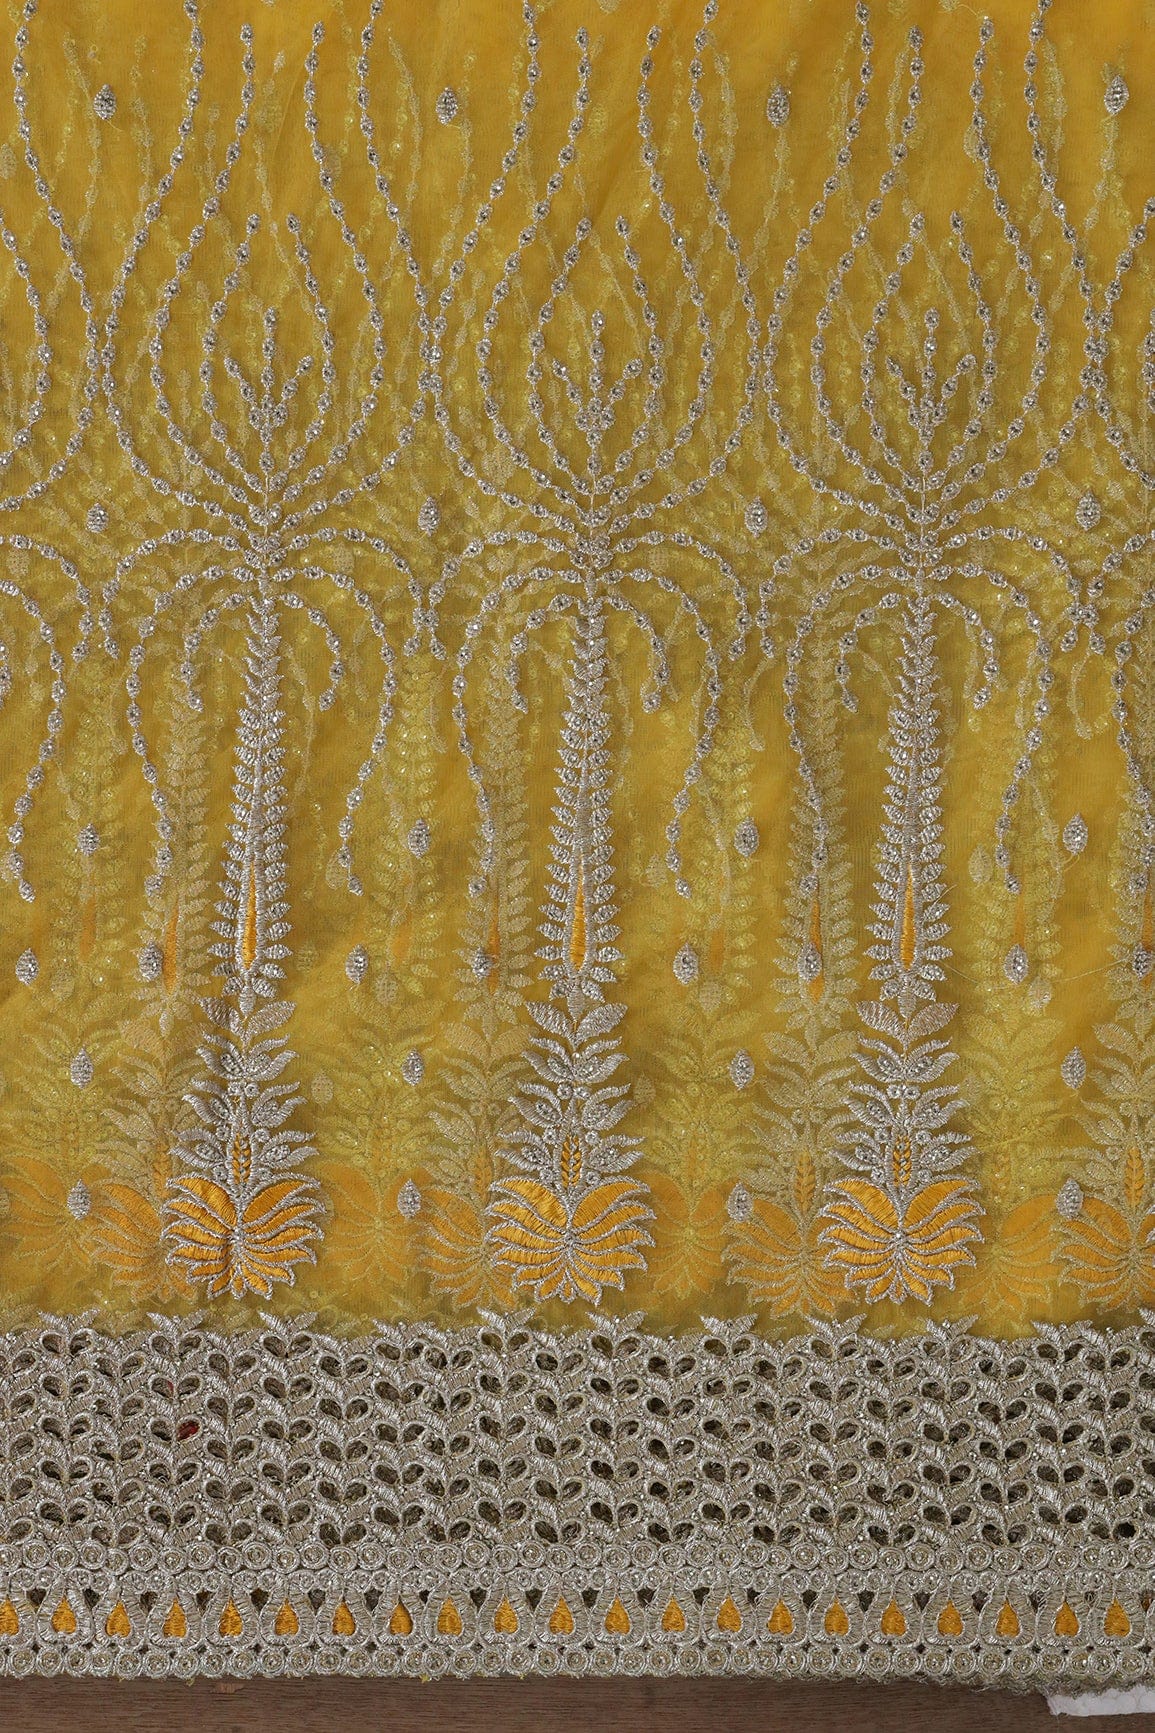 doeraa Embroidery Fabrics Big Width''56'' Yellow Thread With Zari Traditional Embroidery Work On Yellow Soft Net Fabric With Border